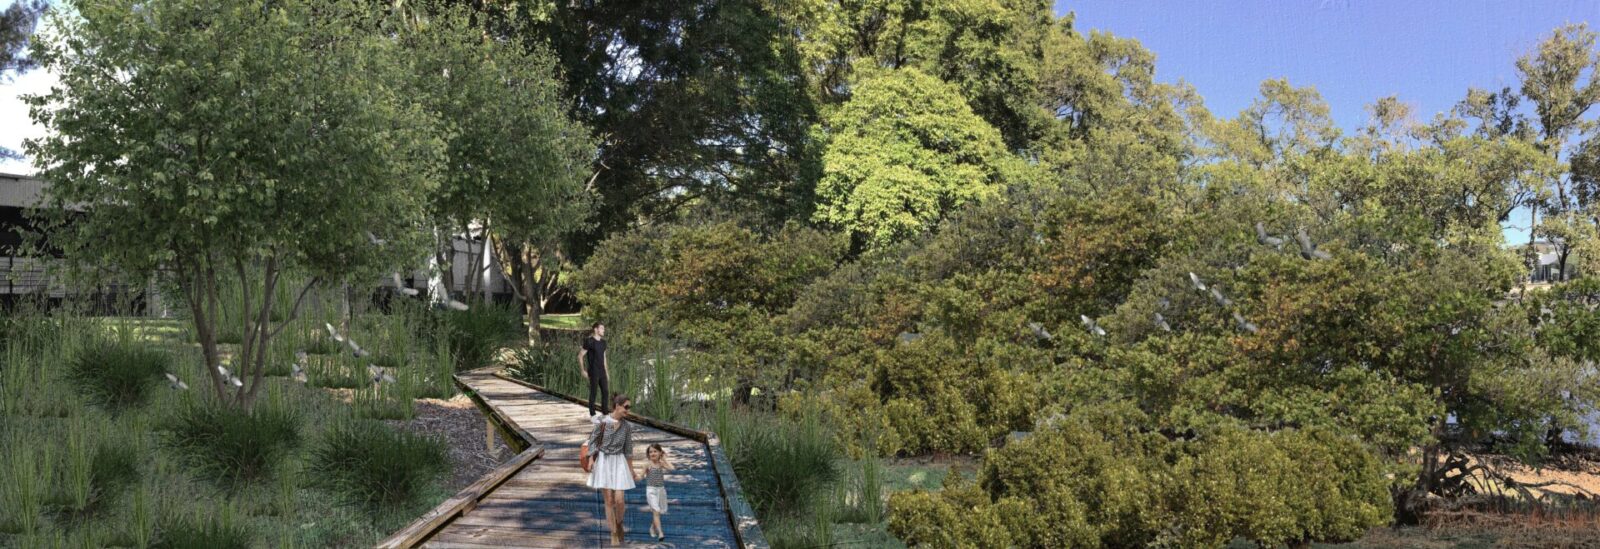 Photographic Almanac 2: The promenade
Demolish the hard concrete river edge and recreate a gentle natural slope to restore freshwater habitat by planting mangroves and other wetland plants. Build up a promenade in the middle to create a beautiful walkway, immersing people inside of nature, river, and surrounding urban setting.